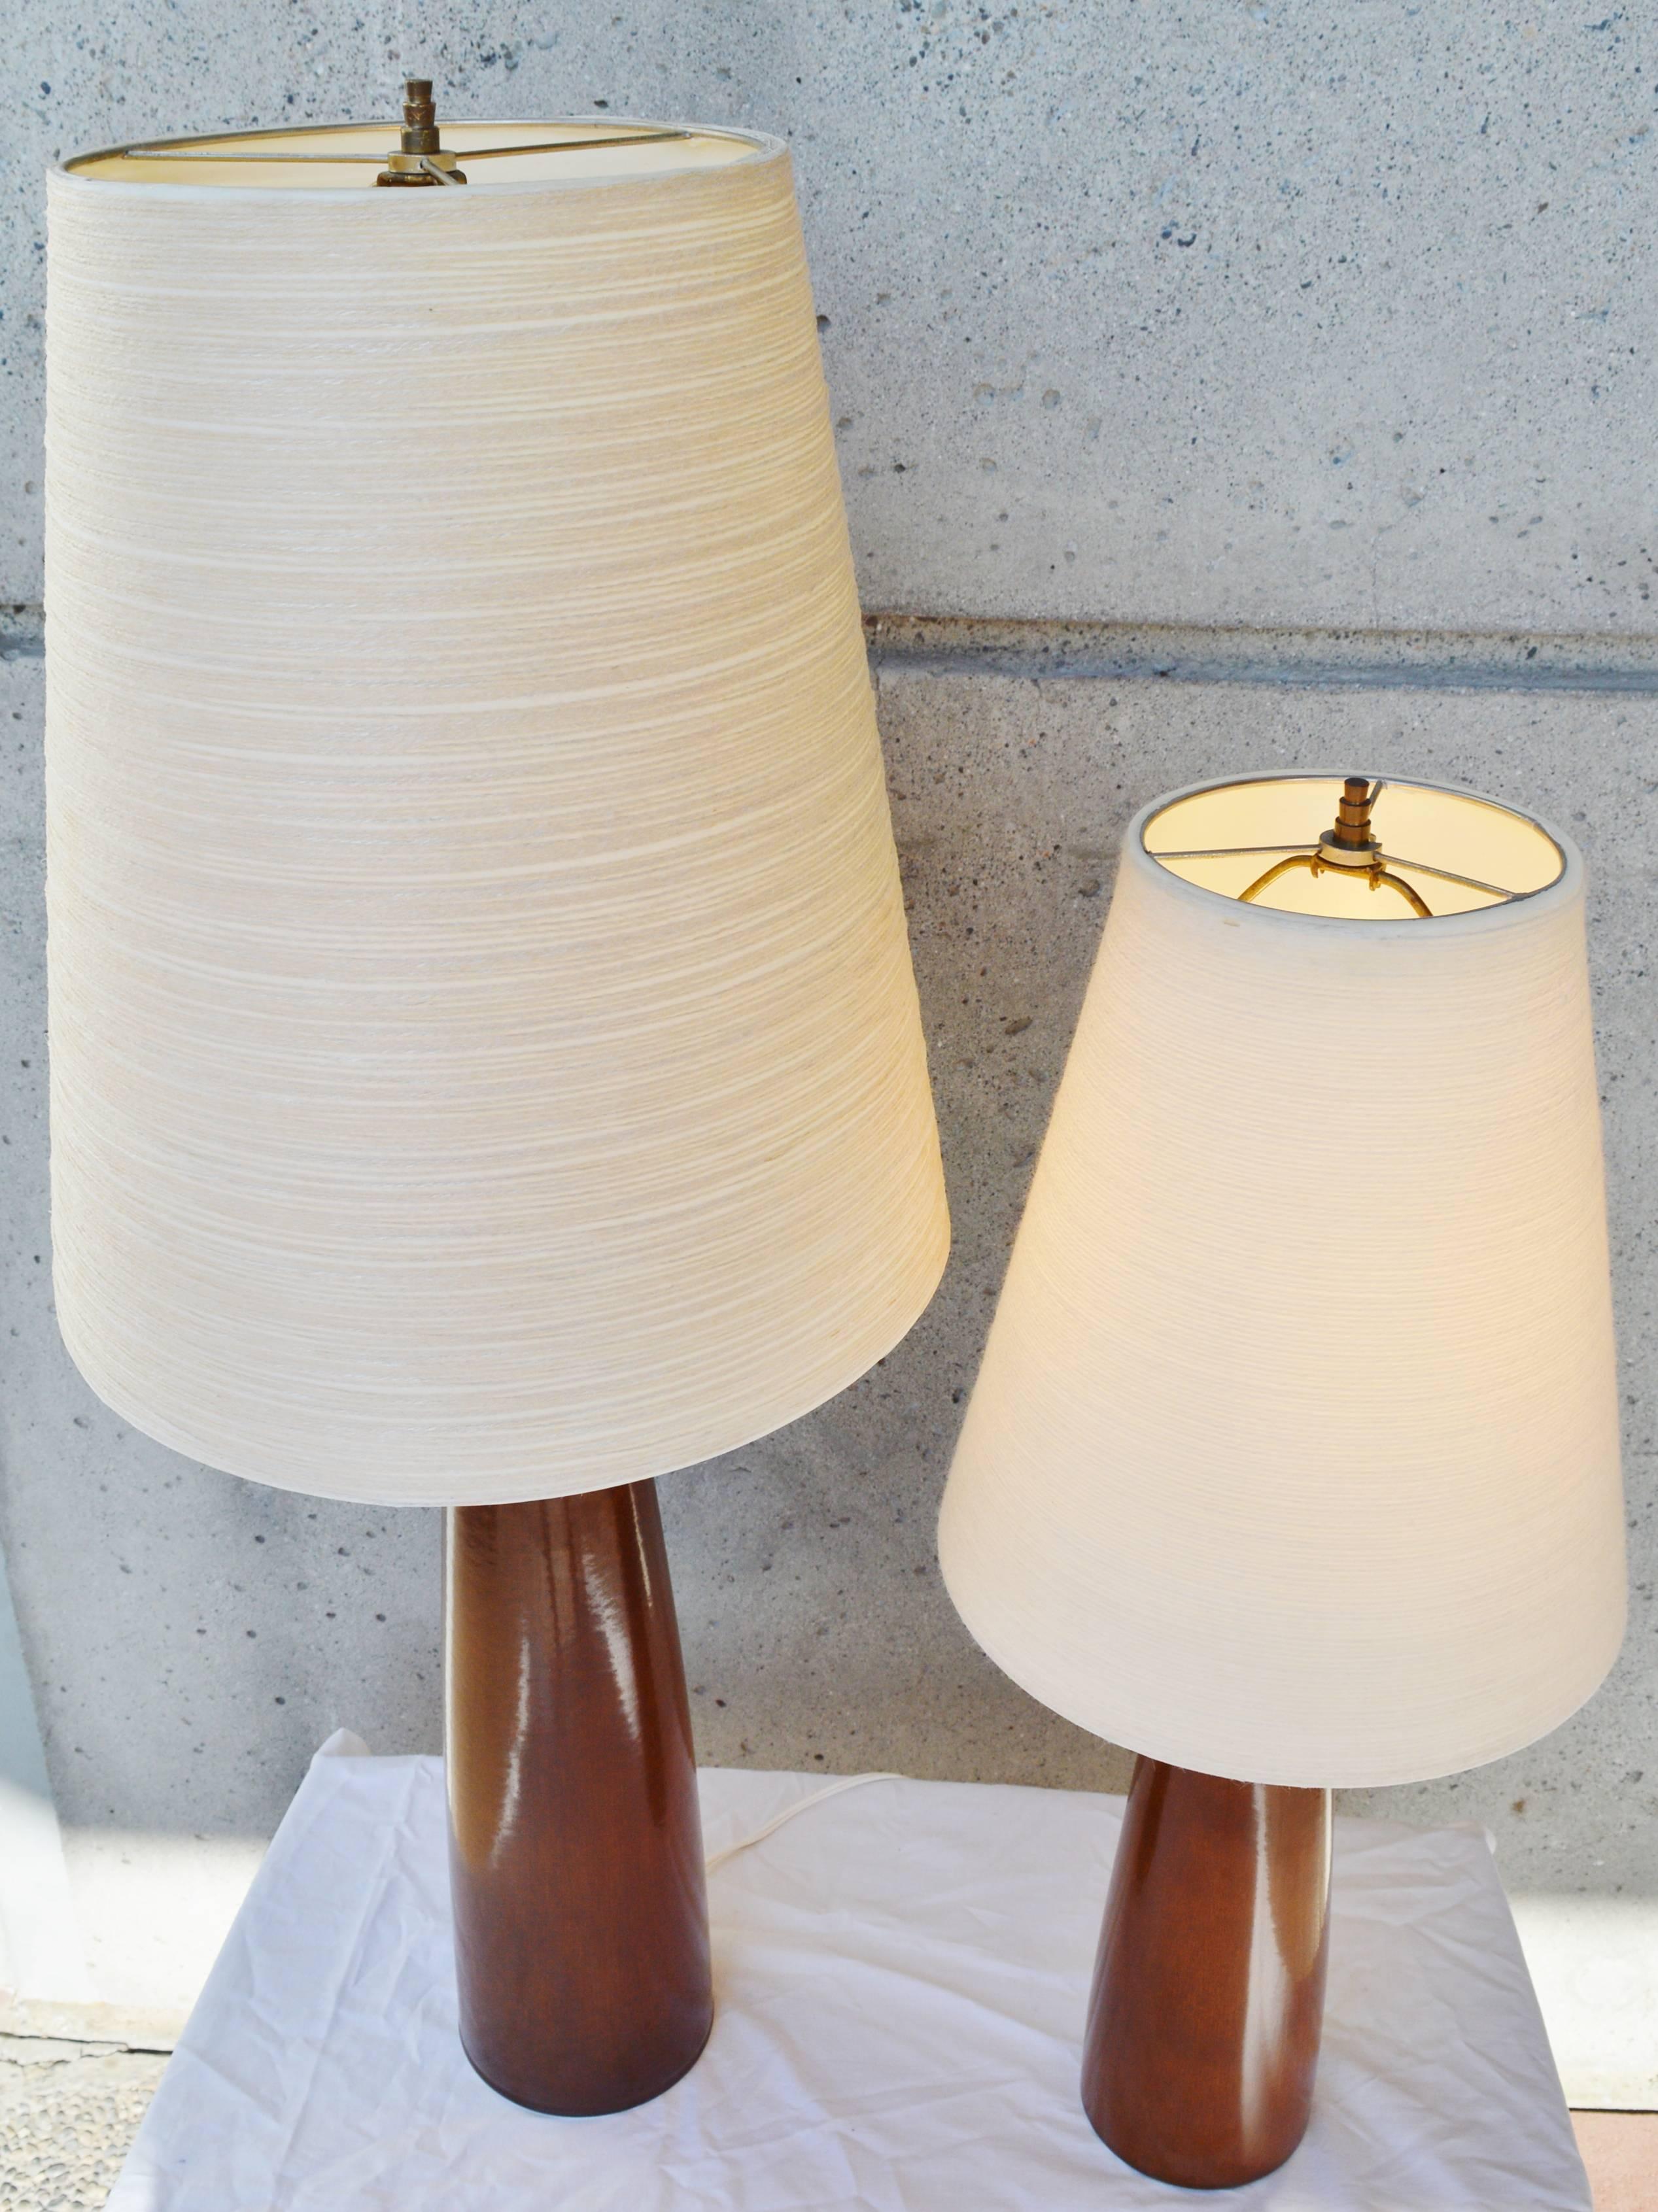 Canadian Pair of Lotte & Gunnar Bostlund Ceramic Lamps with Original Shades and Finials